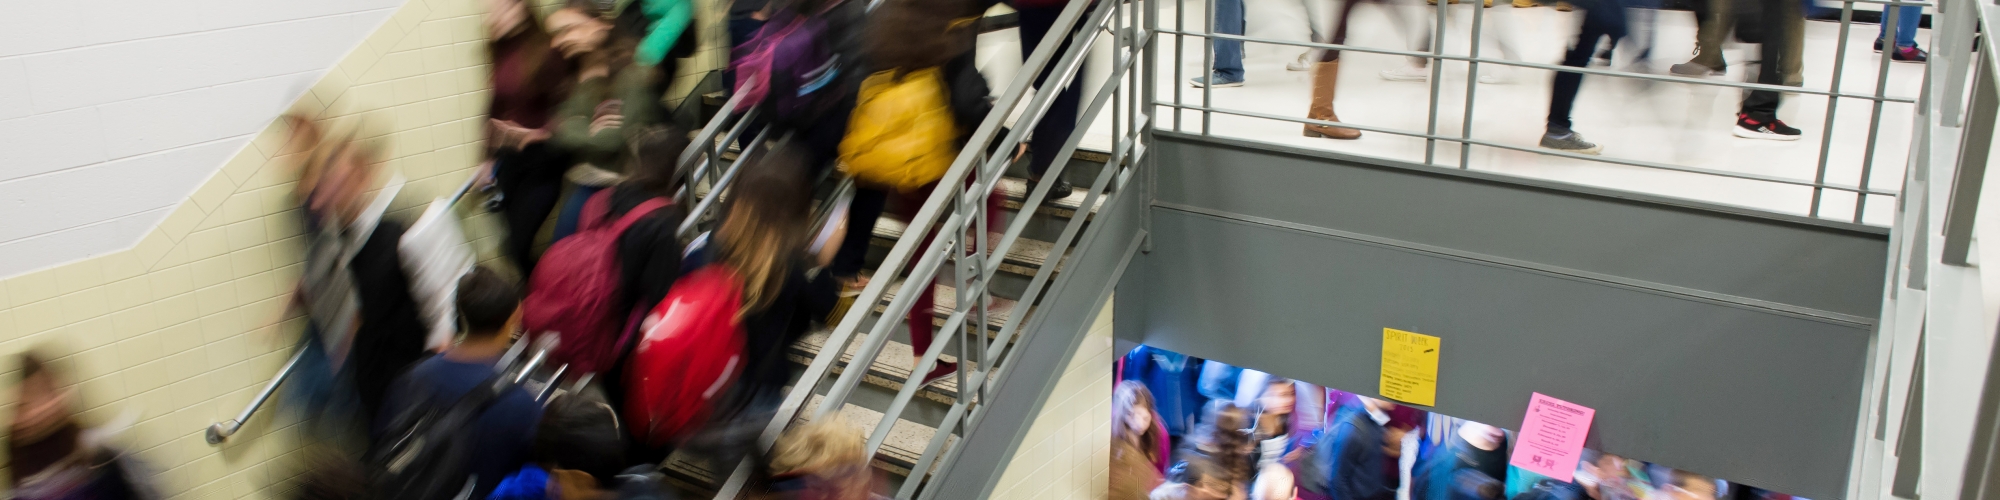 photo of students in a school stairwell